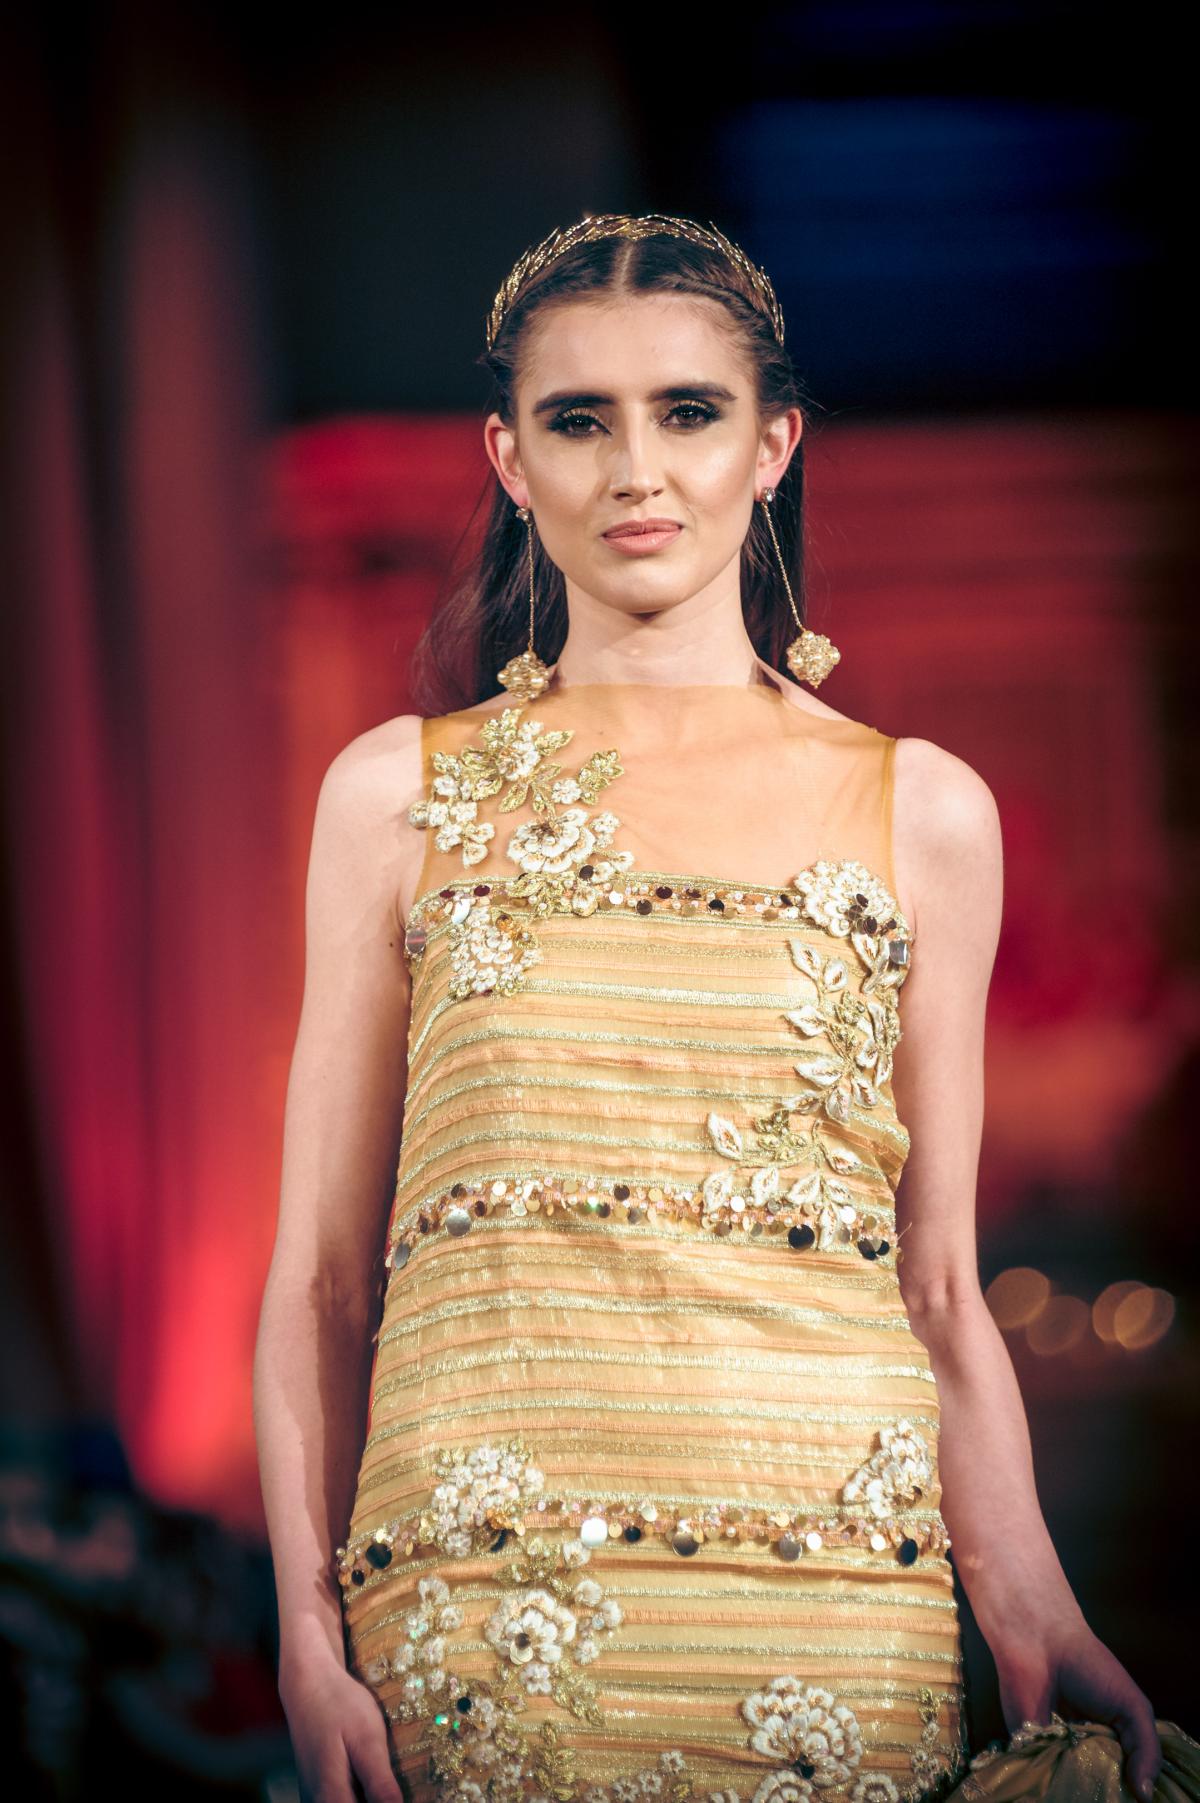 Mustang Productions celebrated 70 years of Pakistan’s style evolution on Monday 6 February with the inaugural Fashion Parade Bride & Luxury Prêt,powered by Studio by TCS, at London’s historic former church,One Marylebone. (Fashion Images courtesy Raf